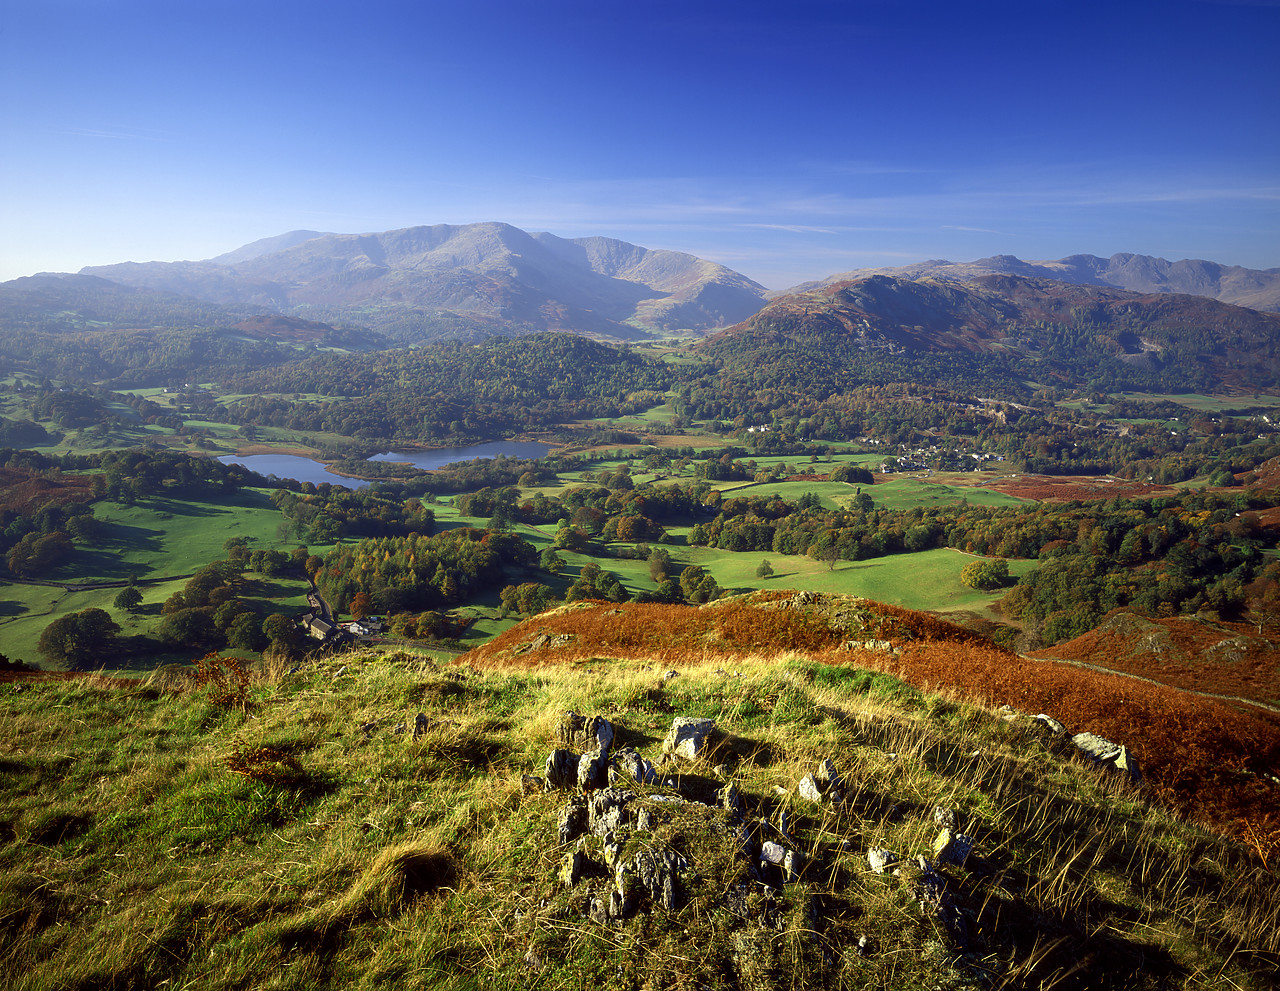 #970453-2 - View over Elterwater, Lake District National Park, Cumbria, England